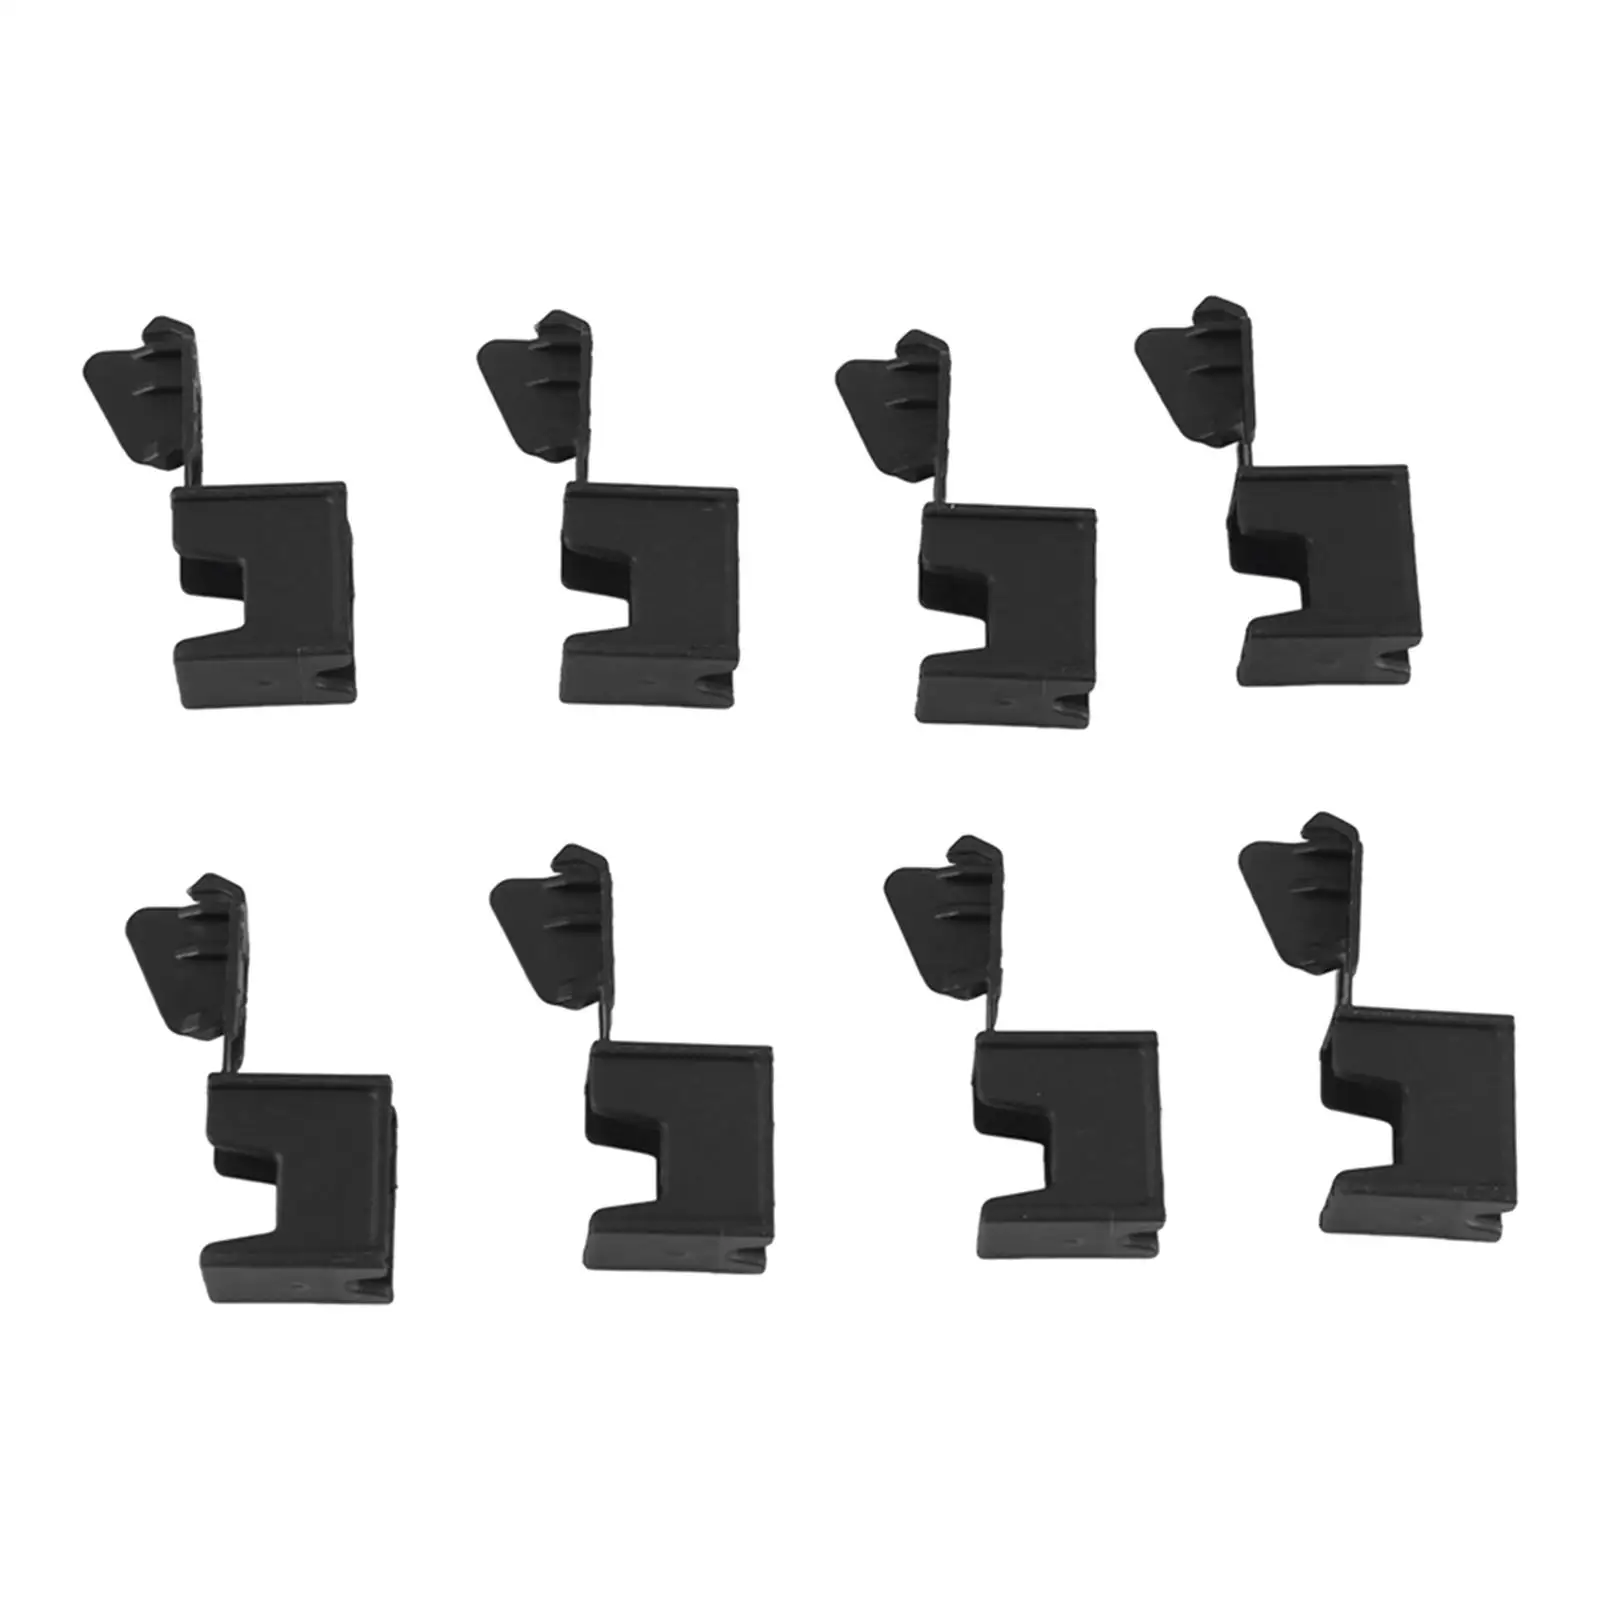 8 Pieces Convertible Rooftop Hinge Cover Clip Part 54377187747 Vehicle